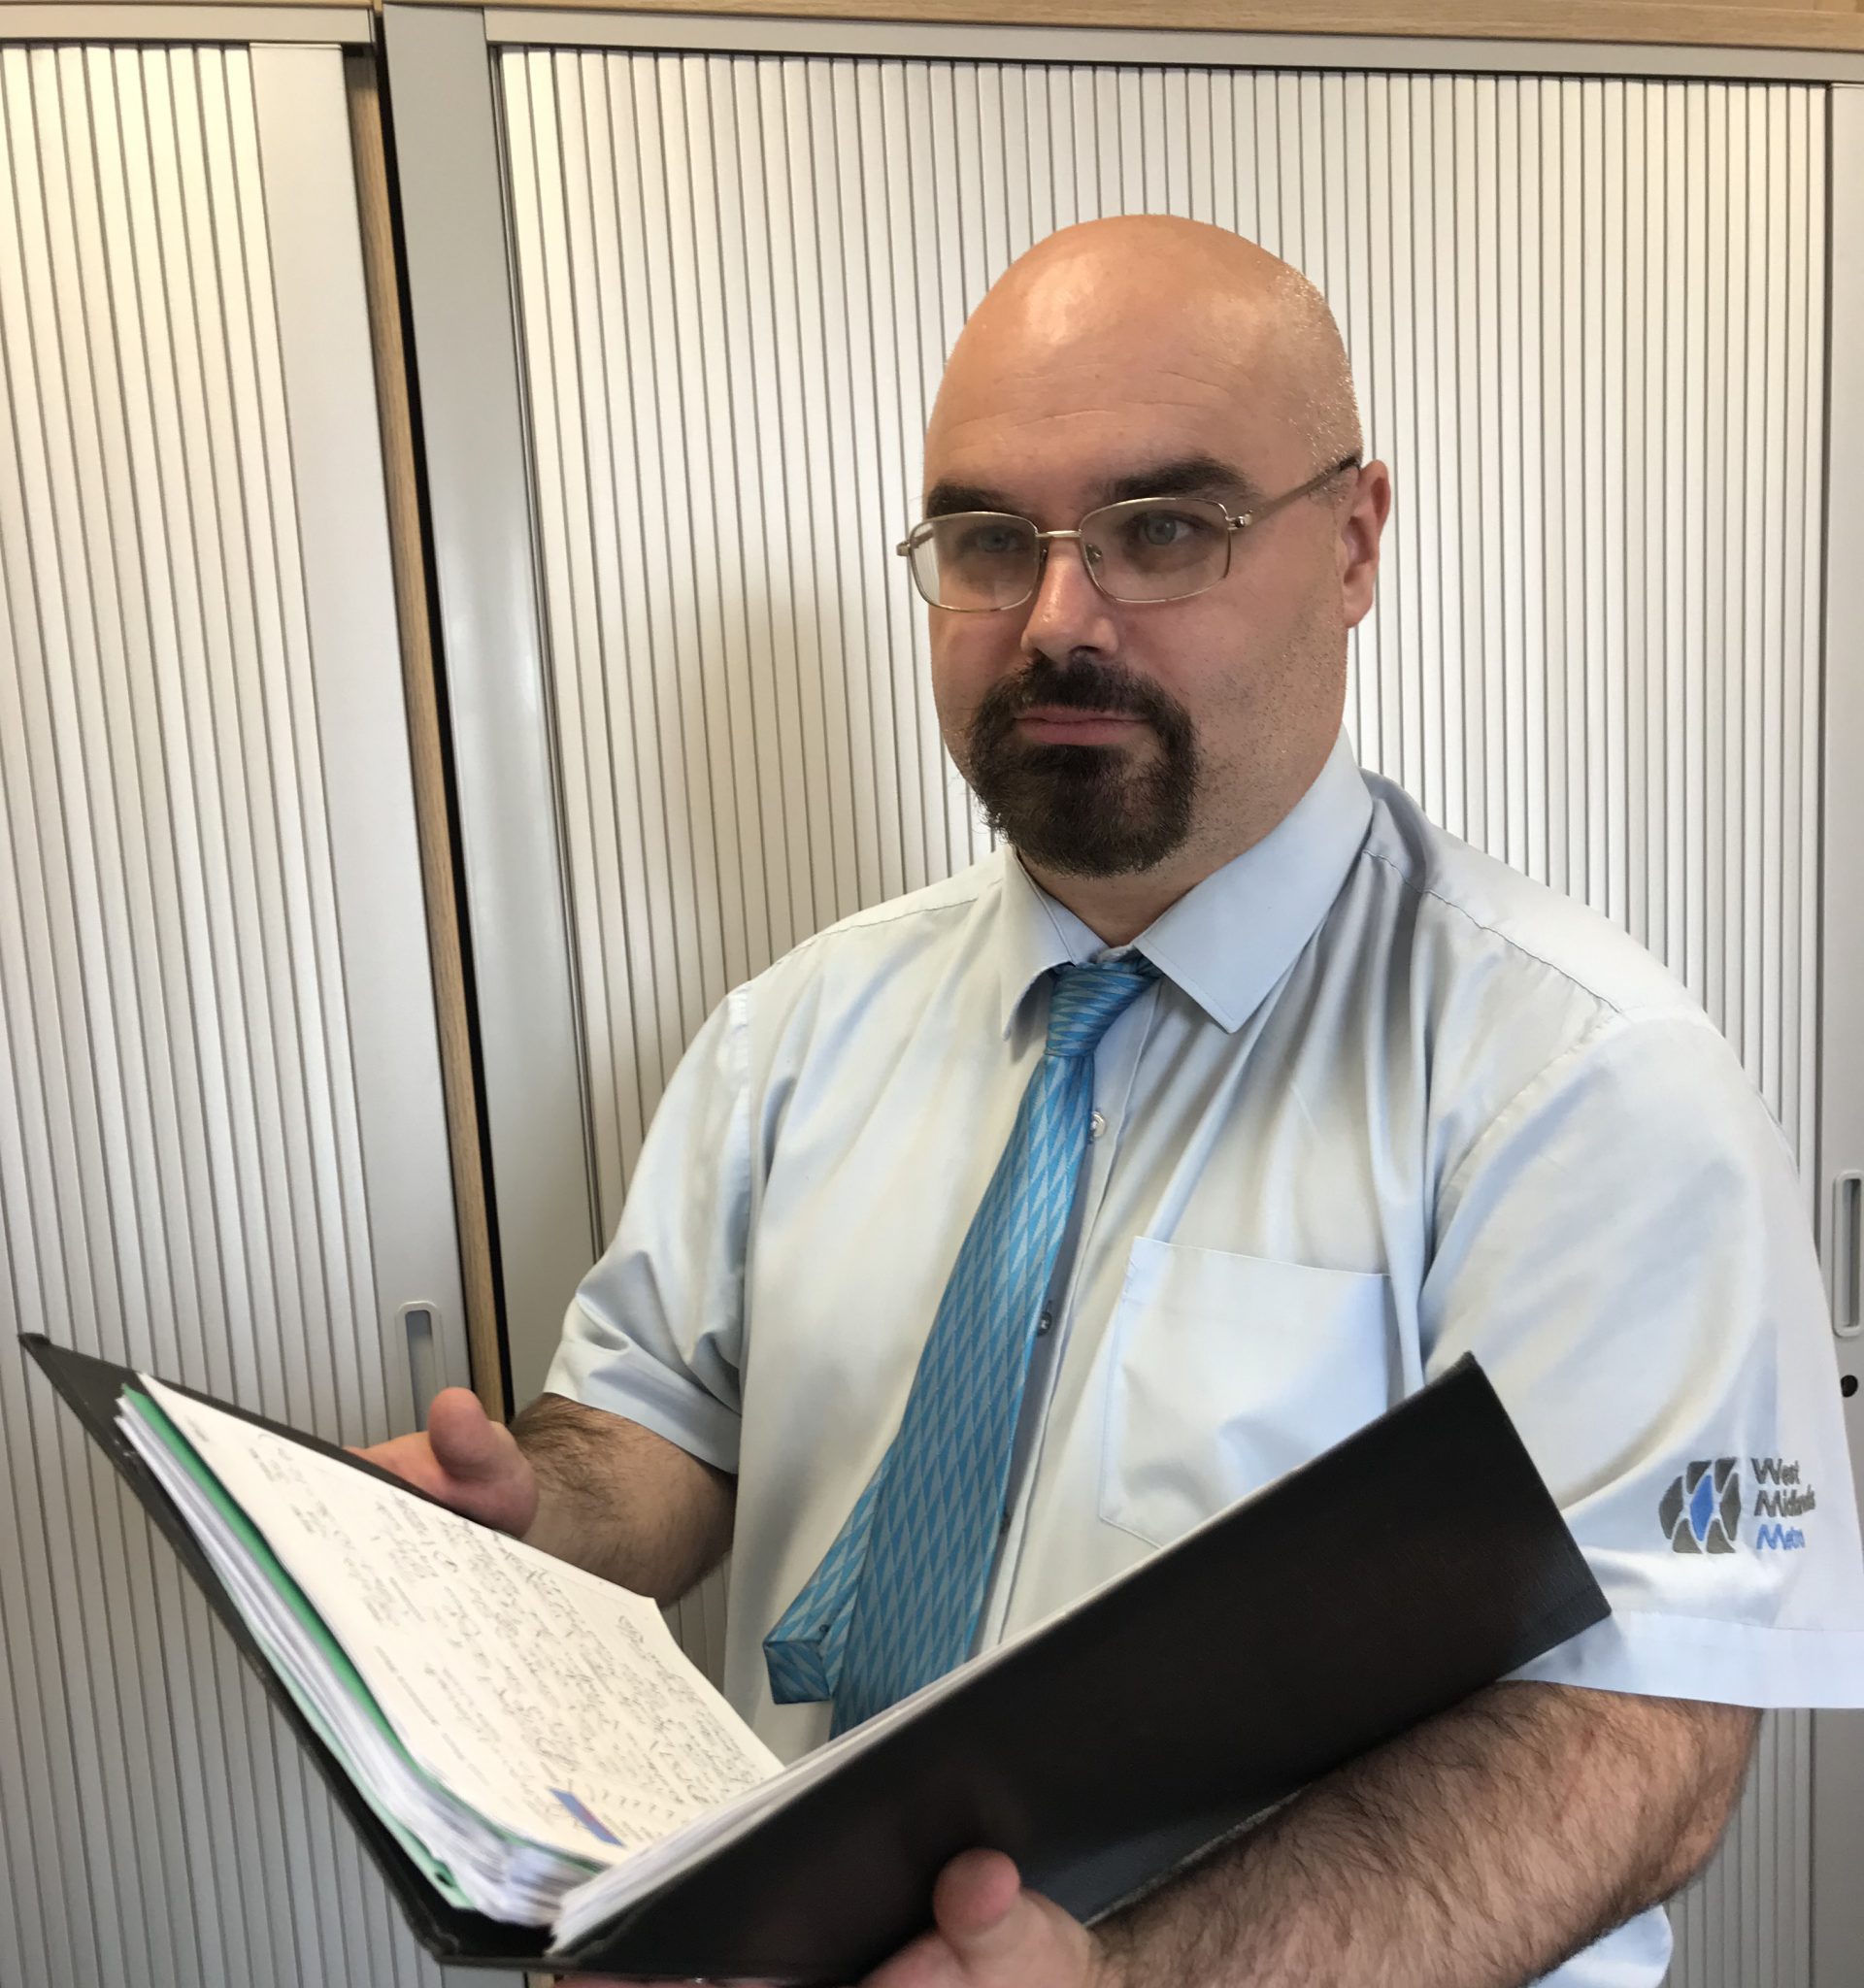 Image of man who works for West Midlands Metro holding a book